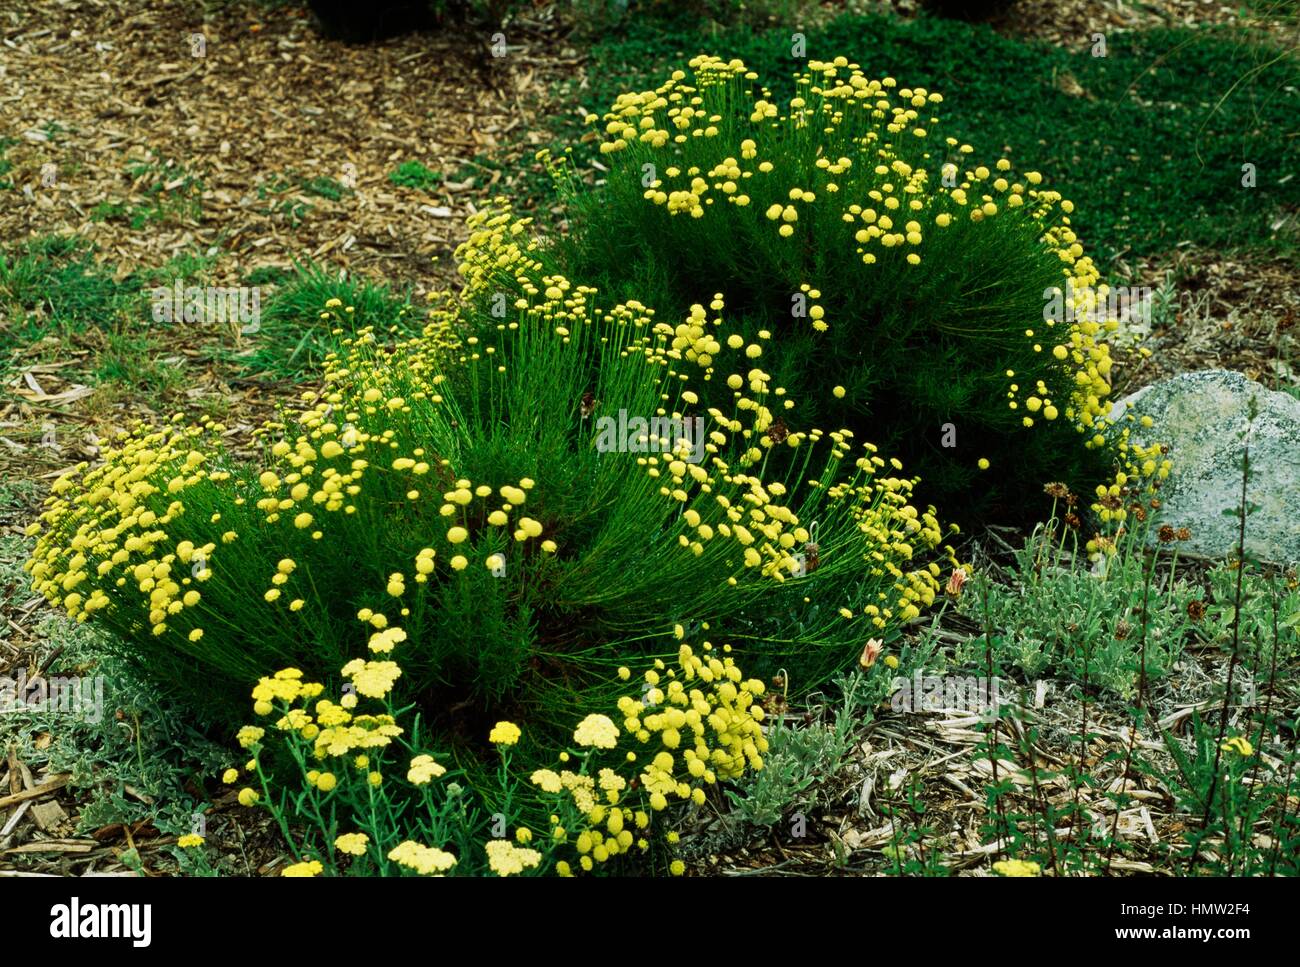 Green lavender cotton in bloom (Santolina virens), Asteraceae. Stock Photo